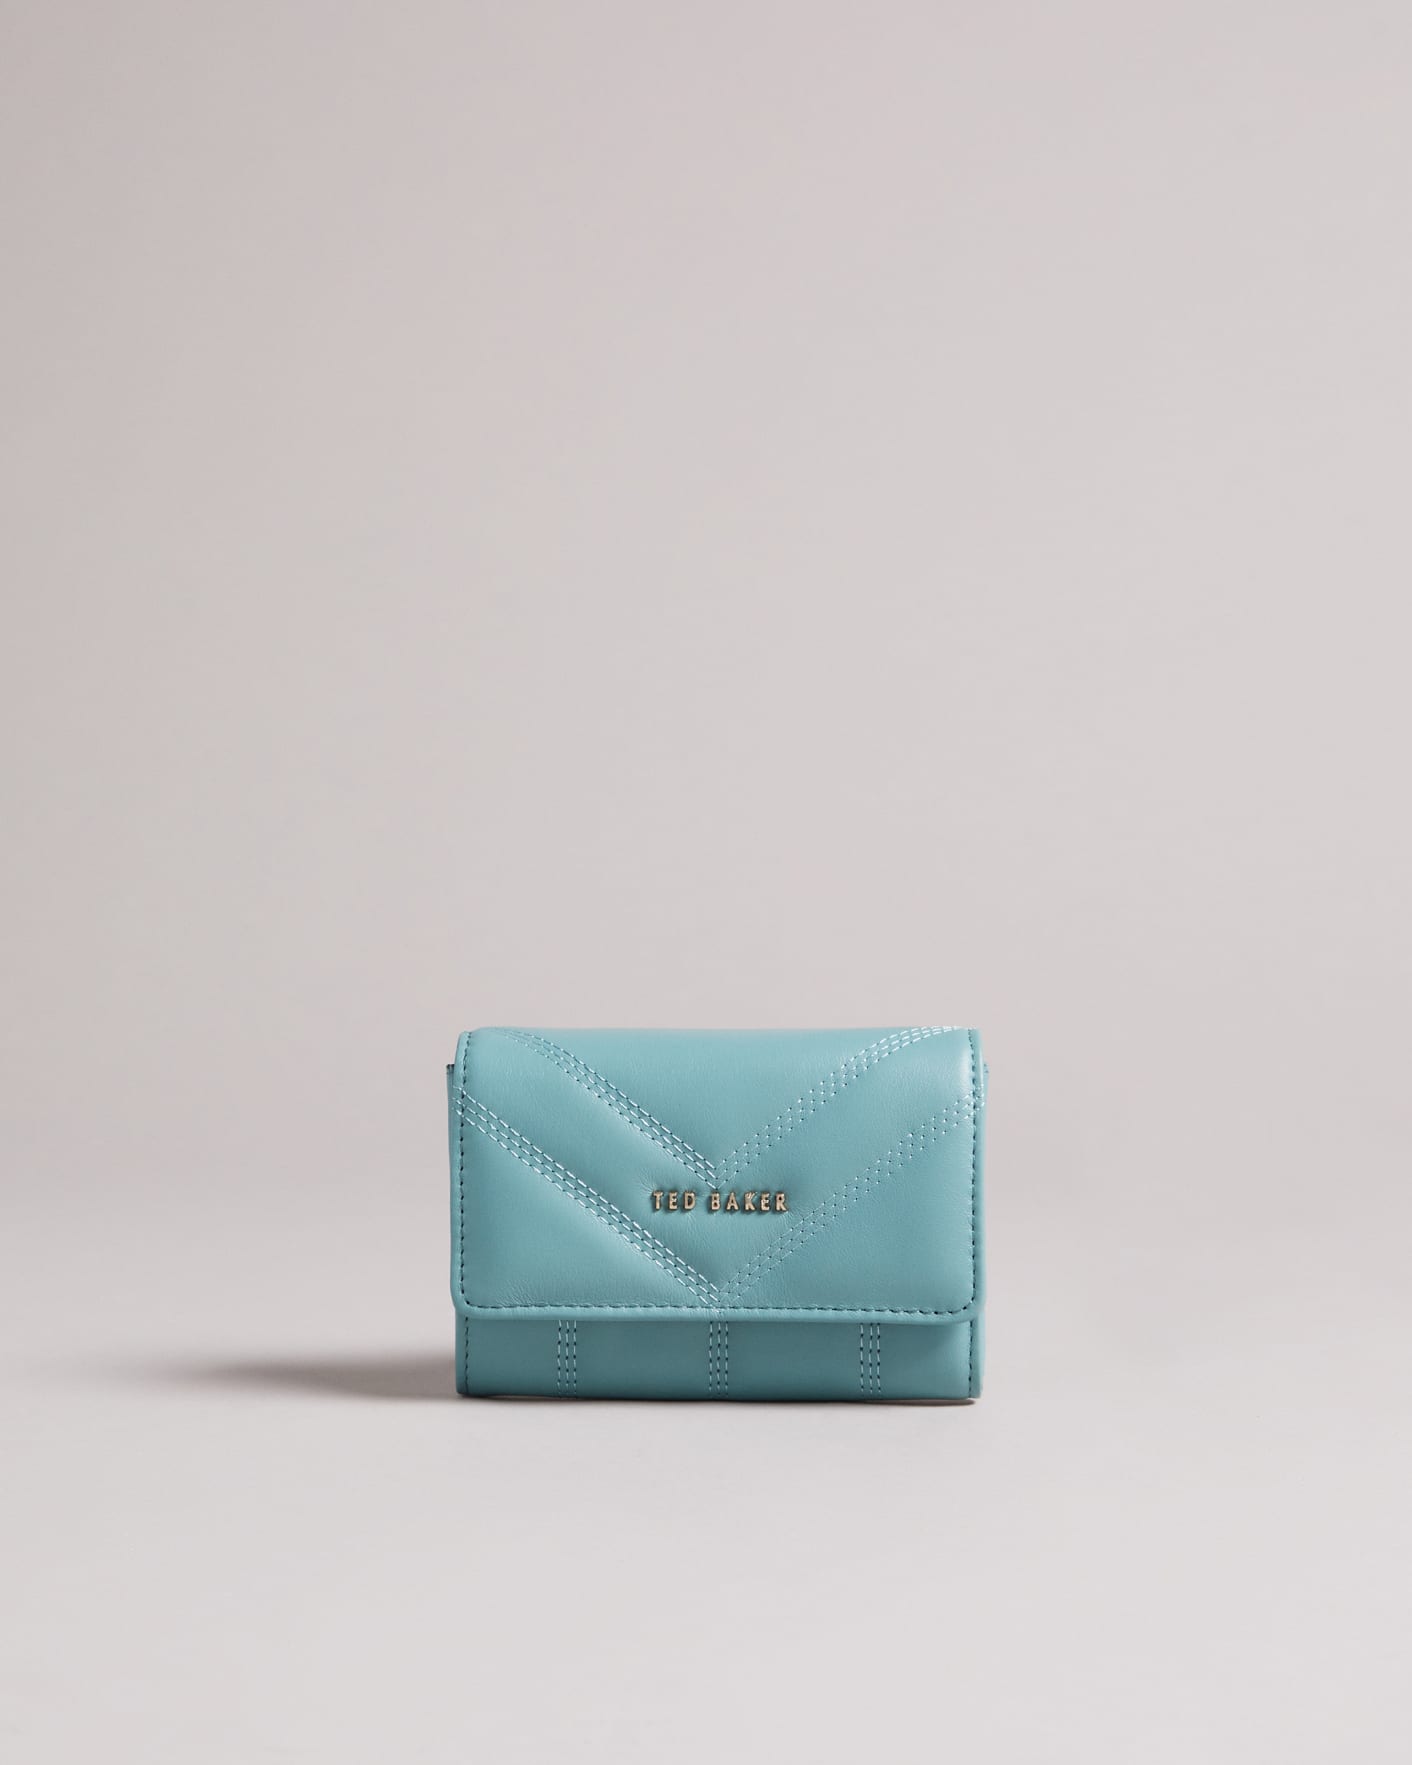 Teal-Blue Leather Puffer Small Matinee Purse Ted Baker